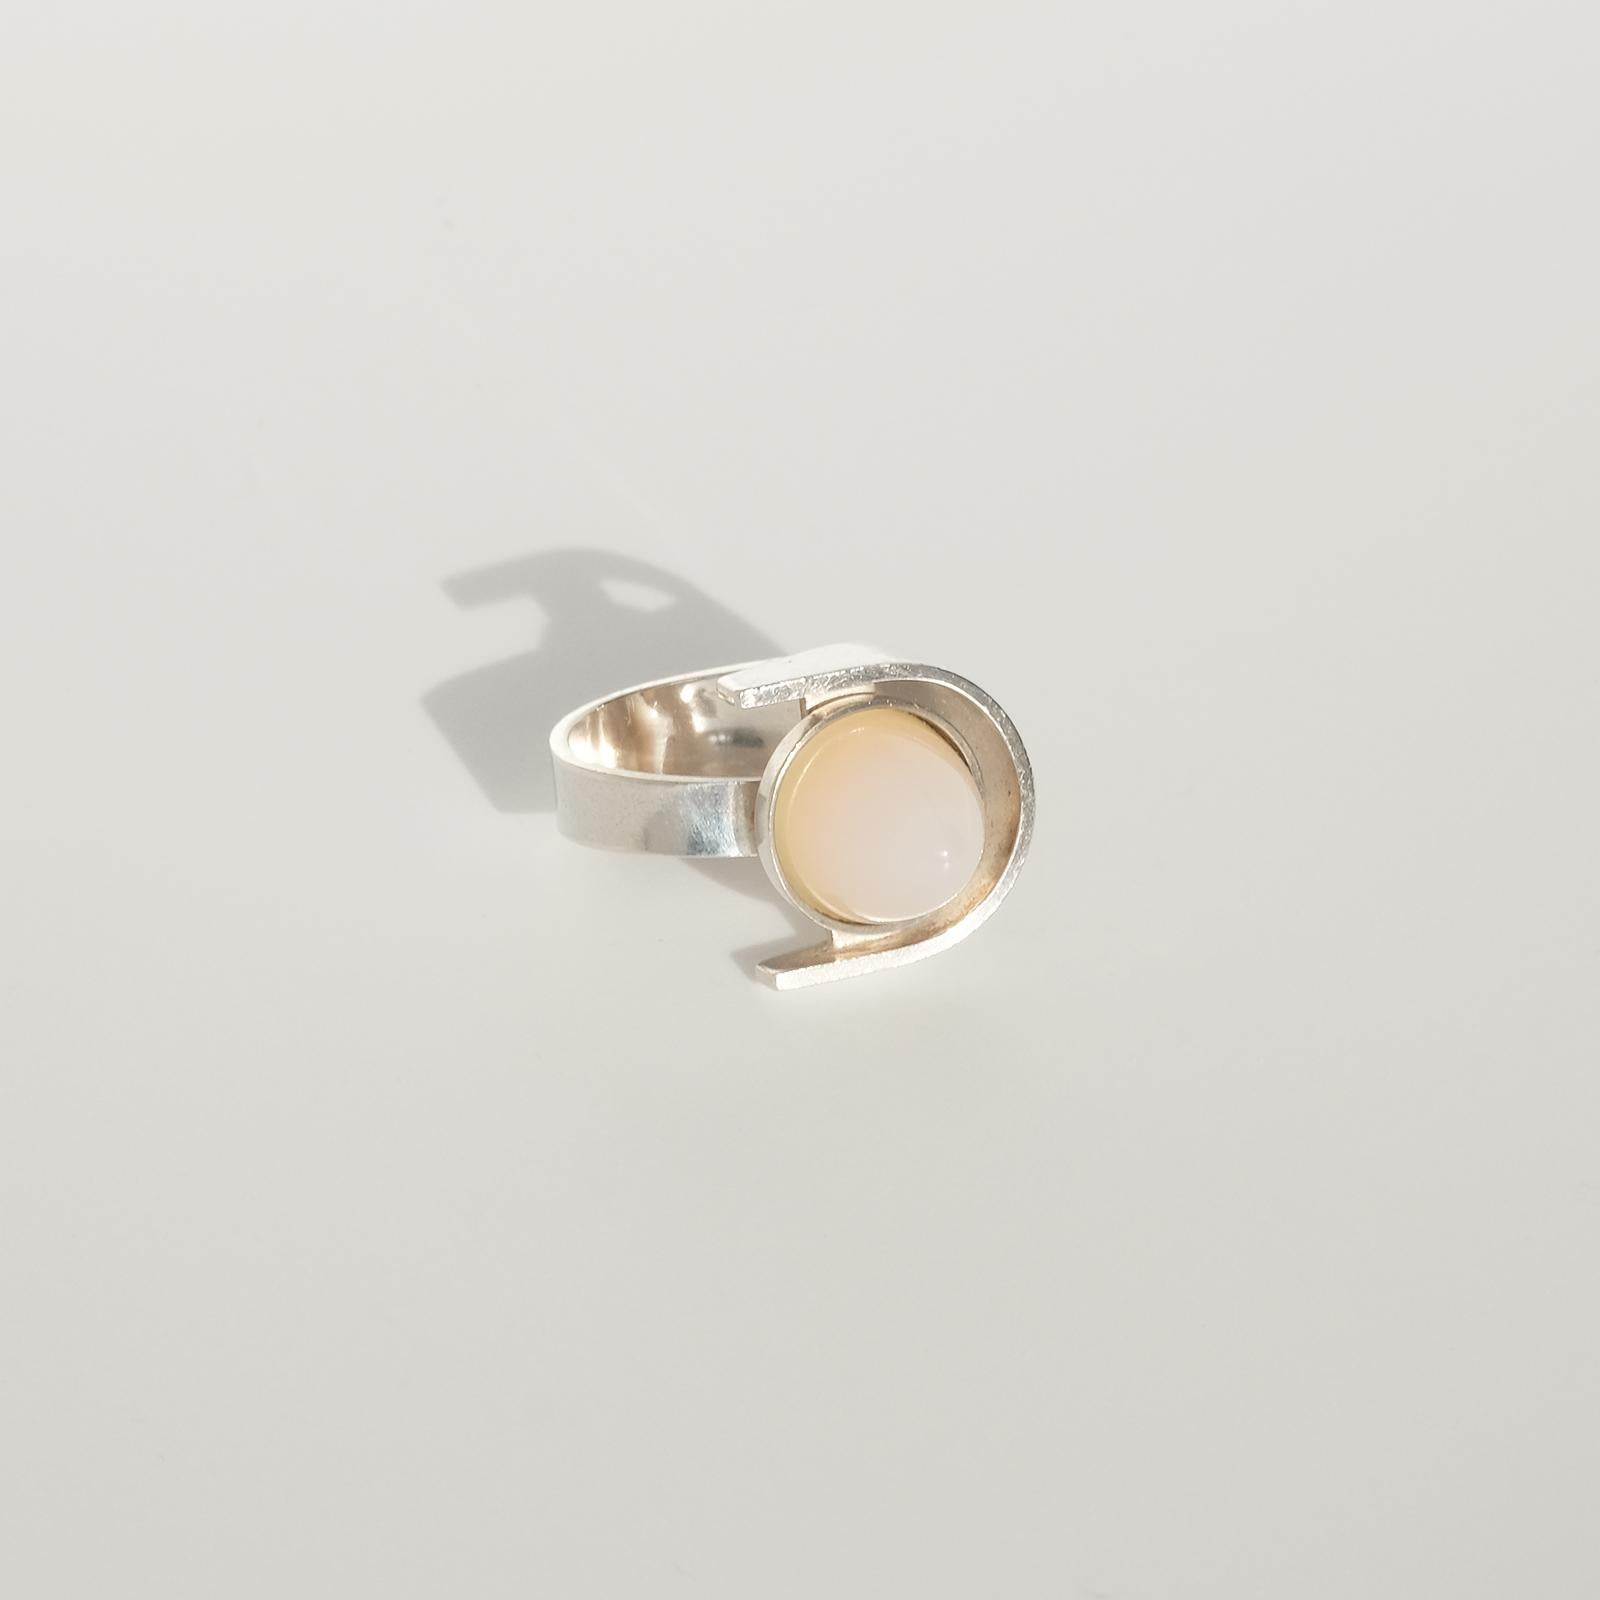 Round Cut Modernistic Finnish Silver Ring with a Moonstone, 1960s